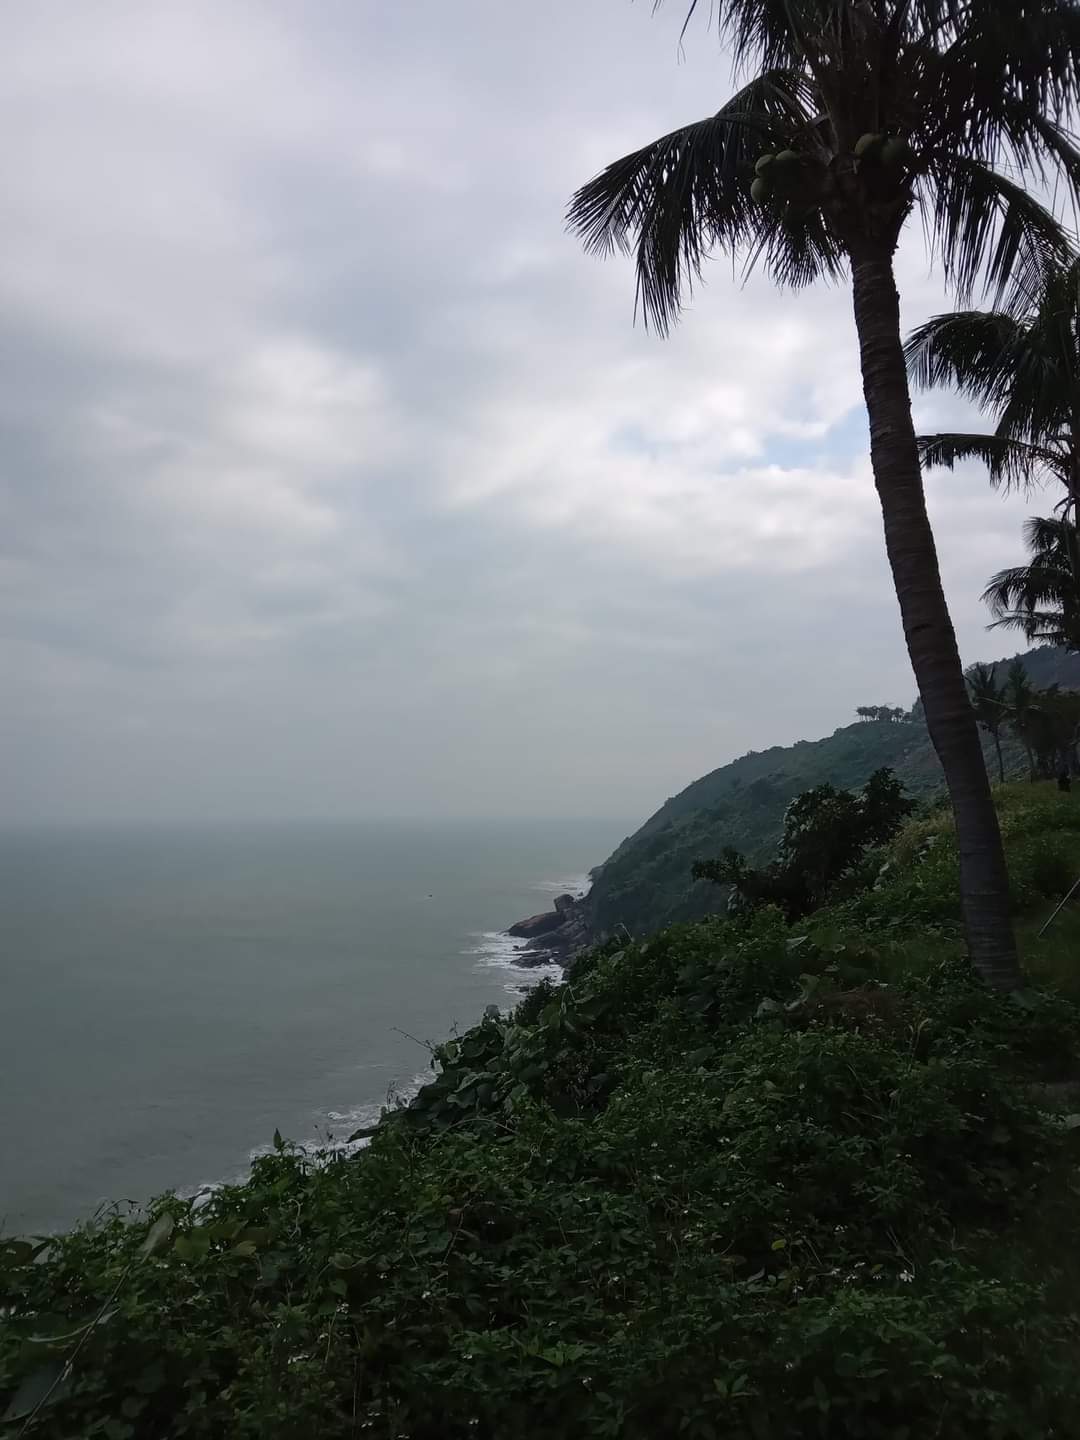 Coastal view from Son Tra Mountain in Vietnam, with two palm trees on the right and a rugged coastline down below